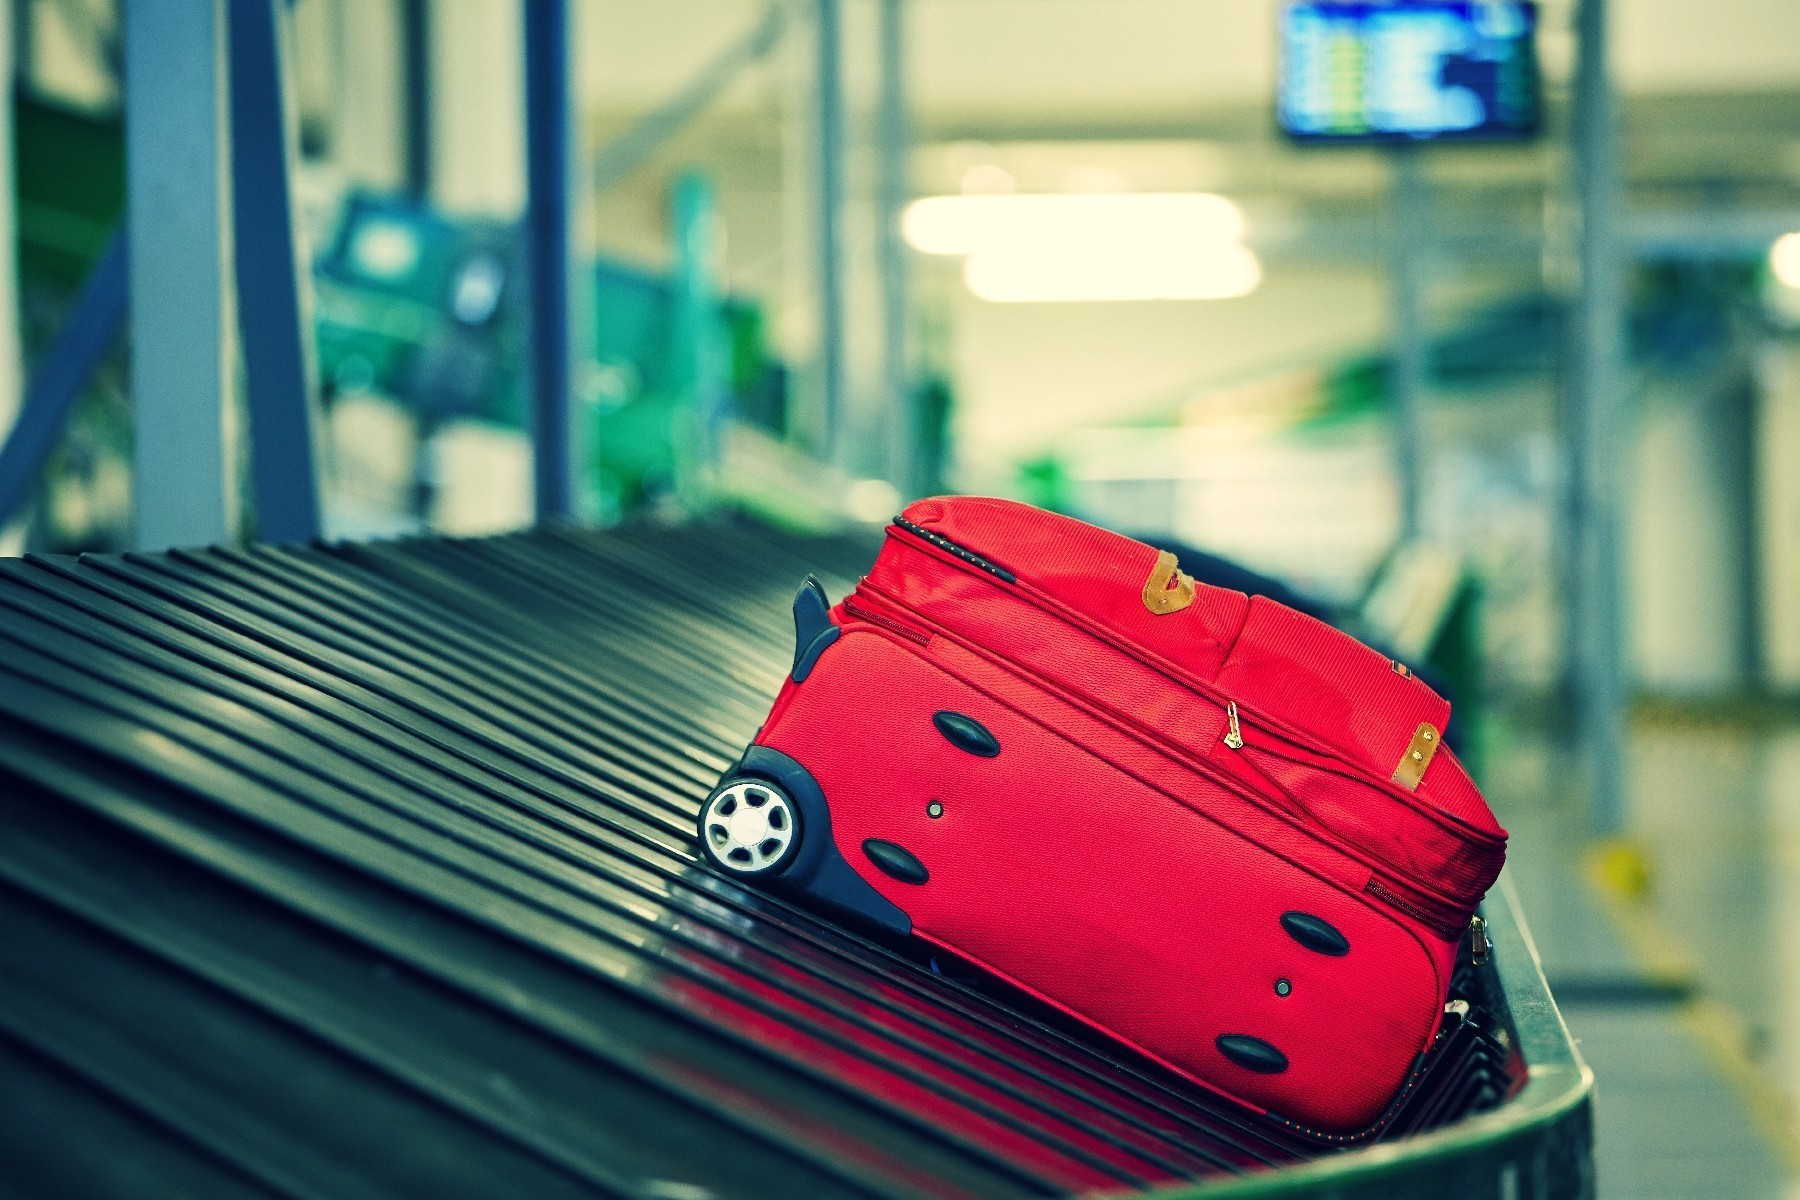 <p>Even the lightest packer may run into issues with baggage when embarking on air travel. It’s a good idea to budget for baggage fees when it comes to flying, but it can become tricky when each airline has its own rules and regulations. Many airlines <a href="https://www.forbes.com/advisor/credit-cards/travel-rewards/avoid-checked-bag-fees/">charge at least $30</a> per checked bag, so that easily adds up when travelling as a family. To avoid fees, you can look into credit cards with cardholder benefits, choose airlines without fees, or pack a carry-on bag only. </p>